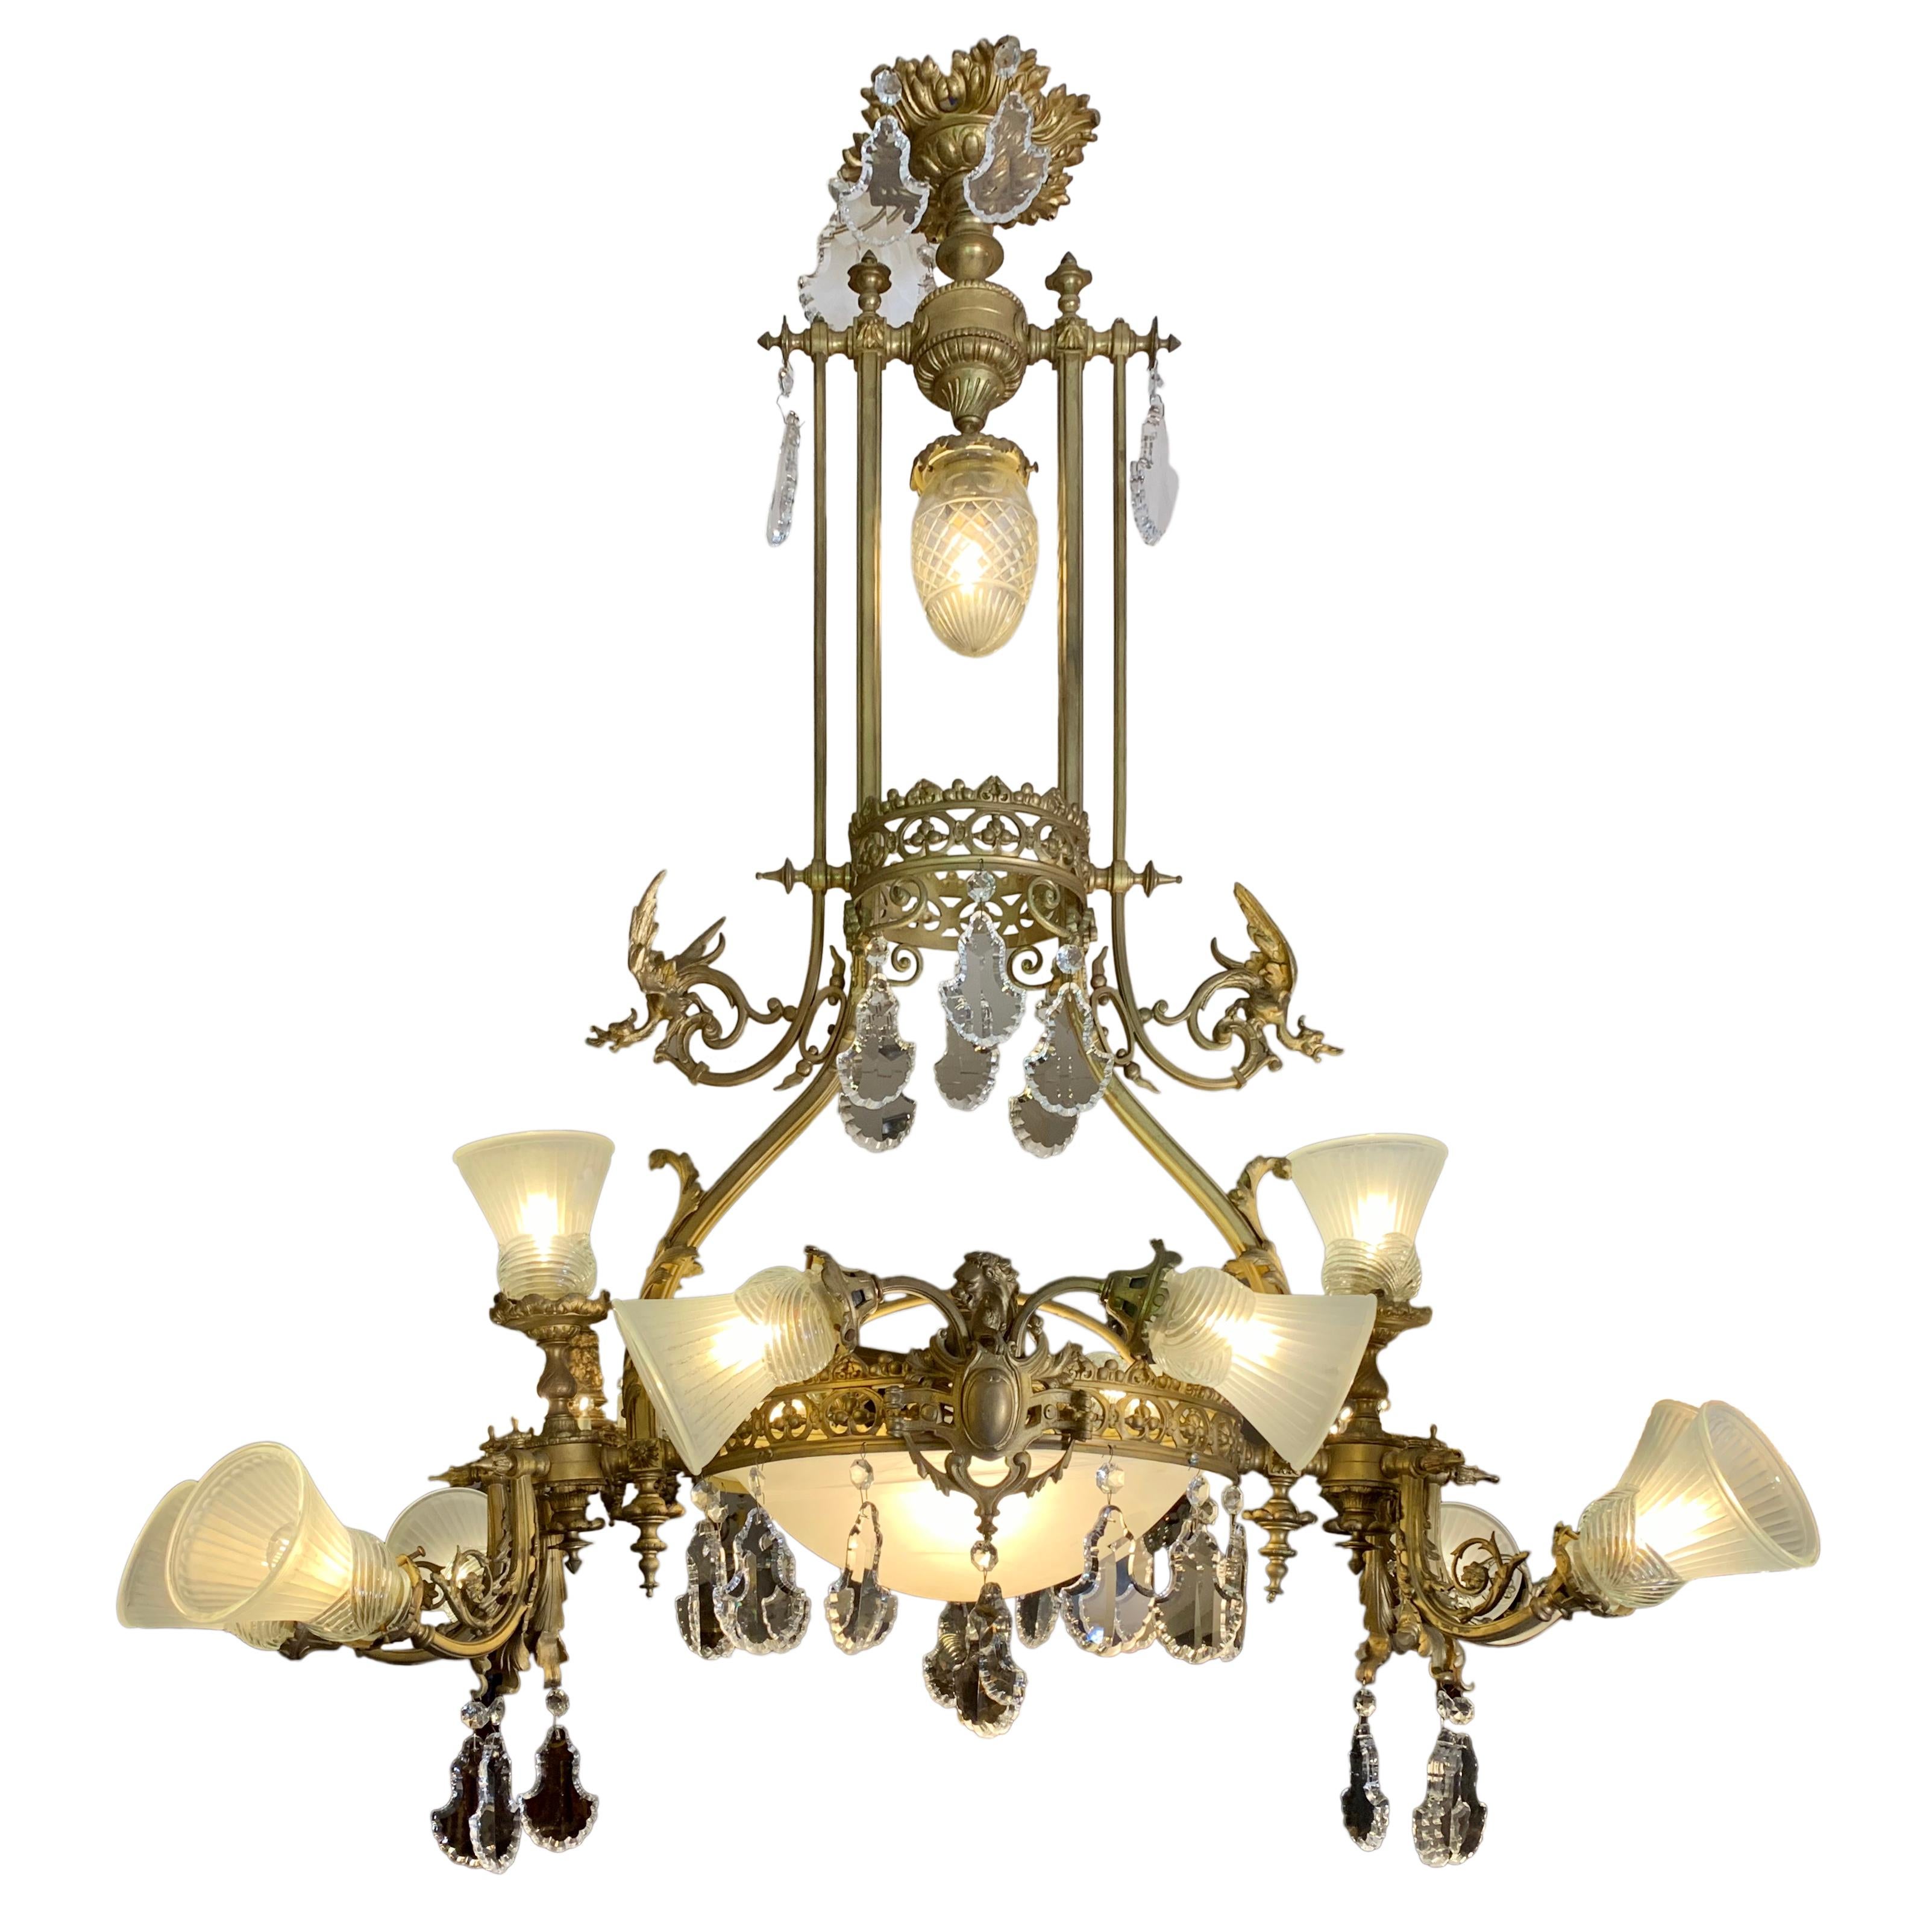 19th Century French Gilt Bronze and Crystal Twelve-Light Chandelier with dragons For Sale 4